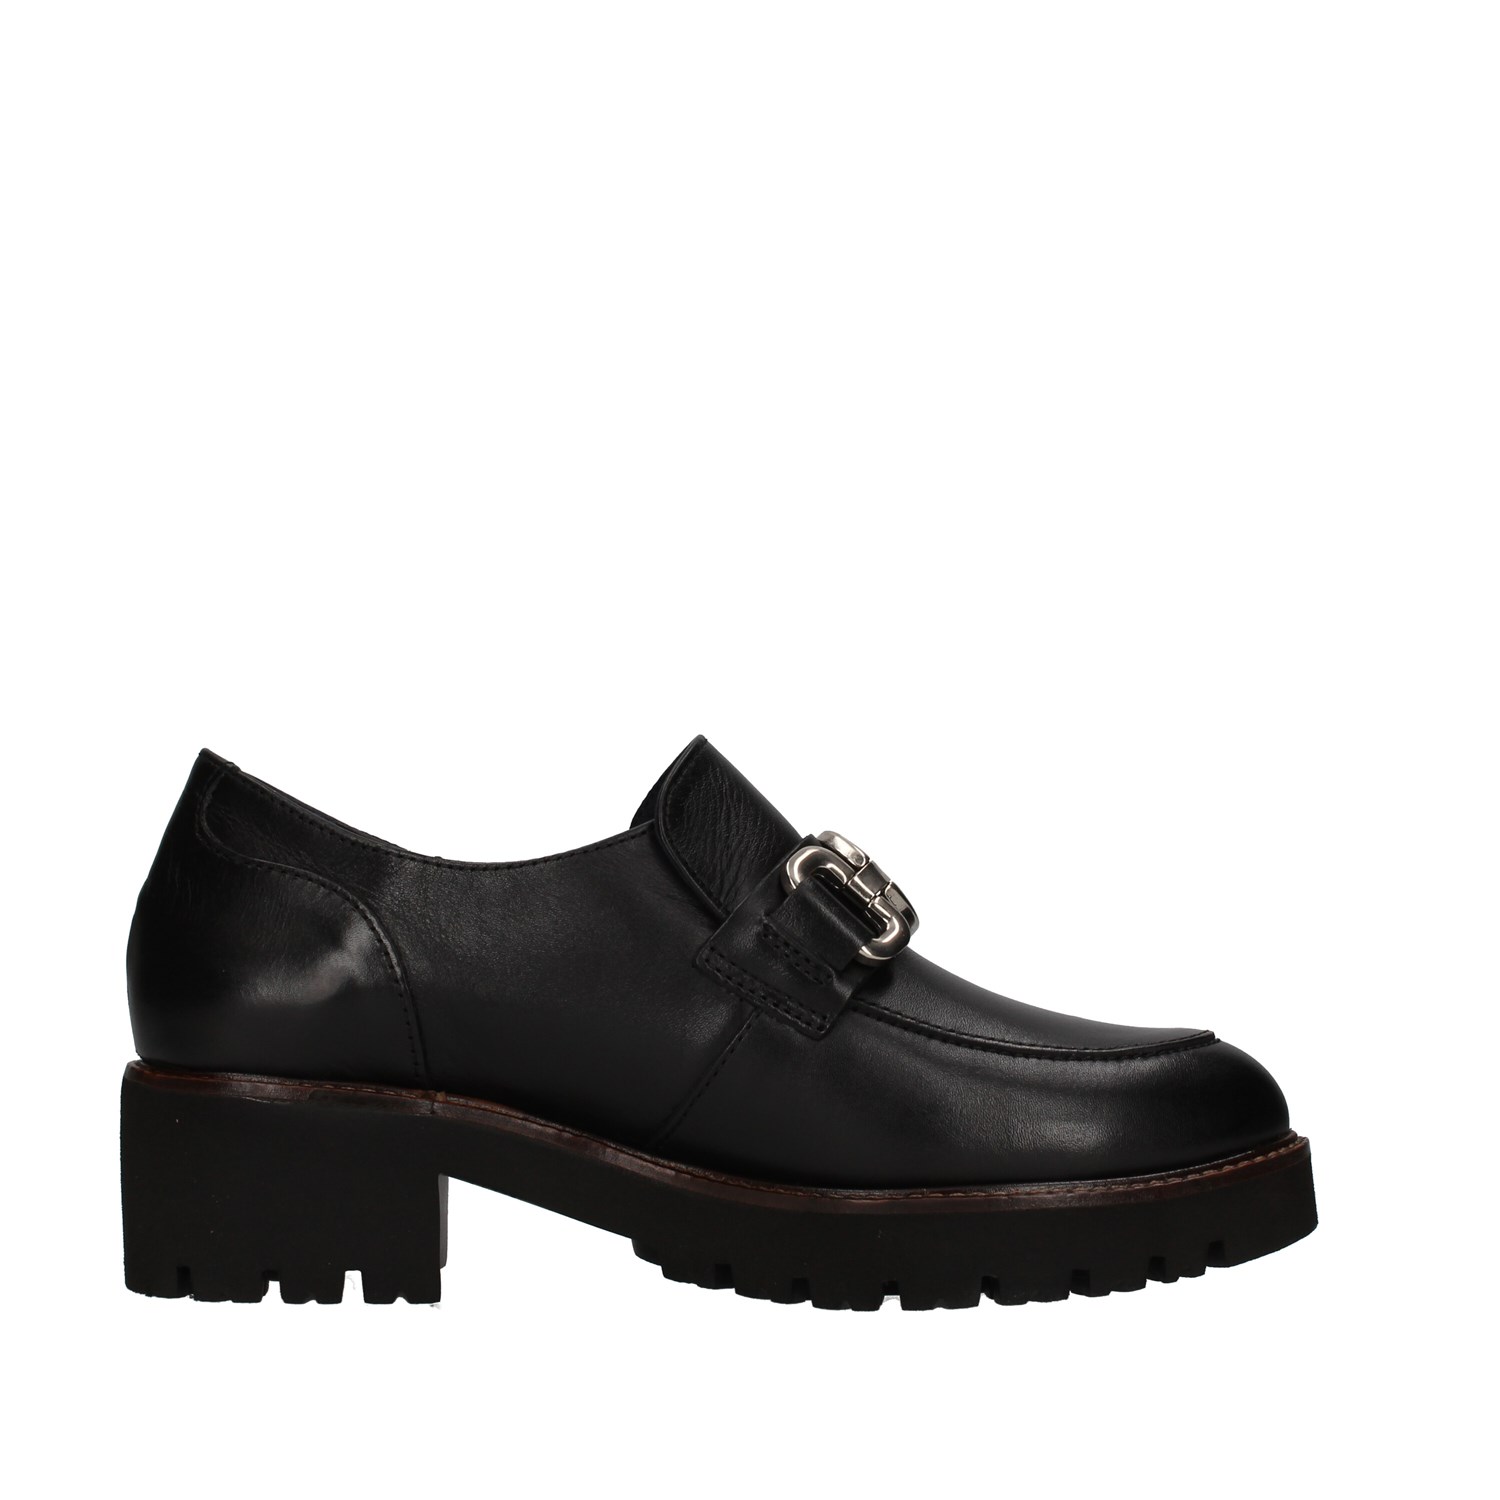 Callaghan Shoes Woman Loafers BLACK 13444